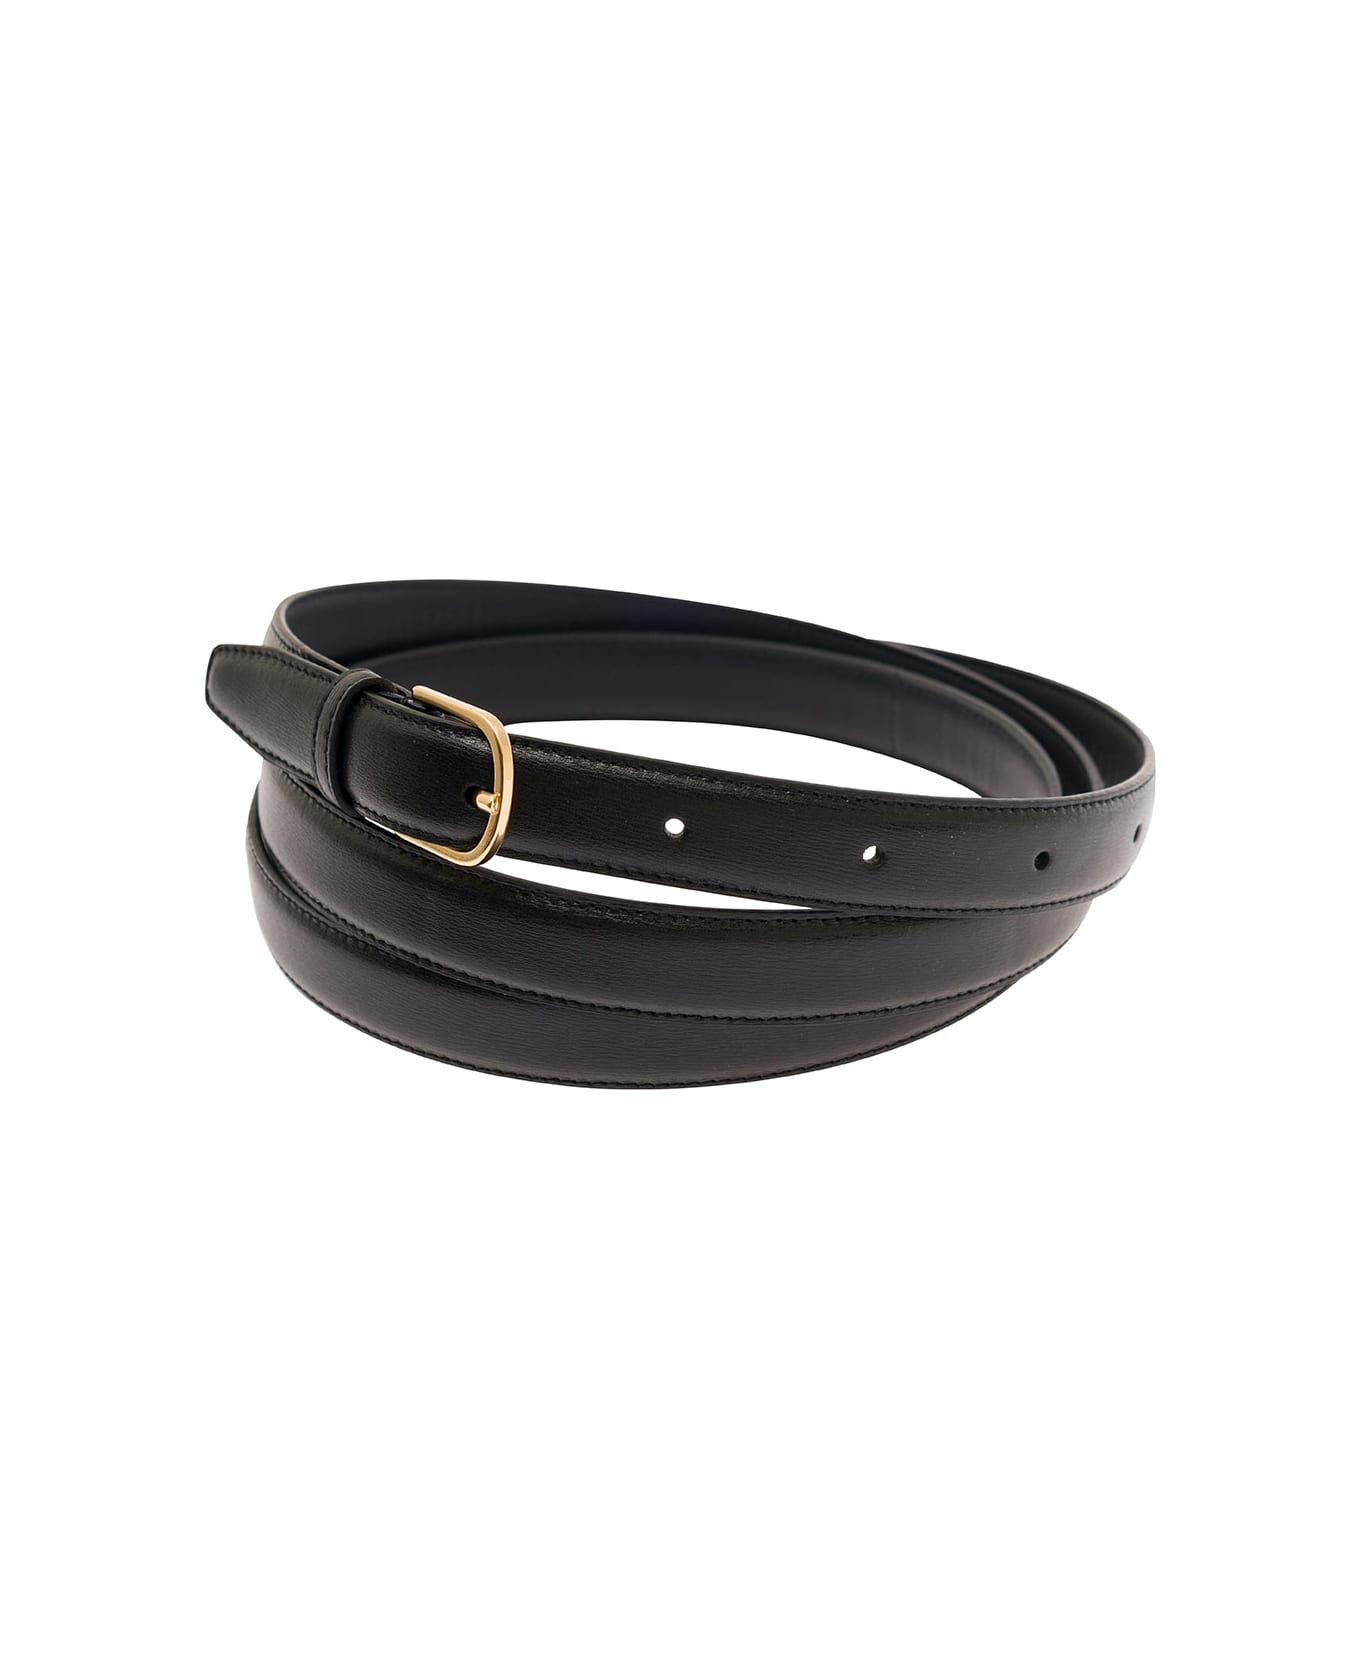 Totême Black Wrap Belt With Gold Tone Buckle In Leather Woman - Black アクセサリー